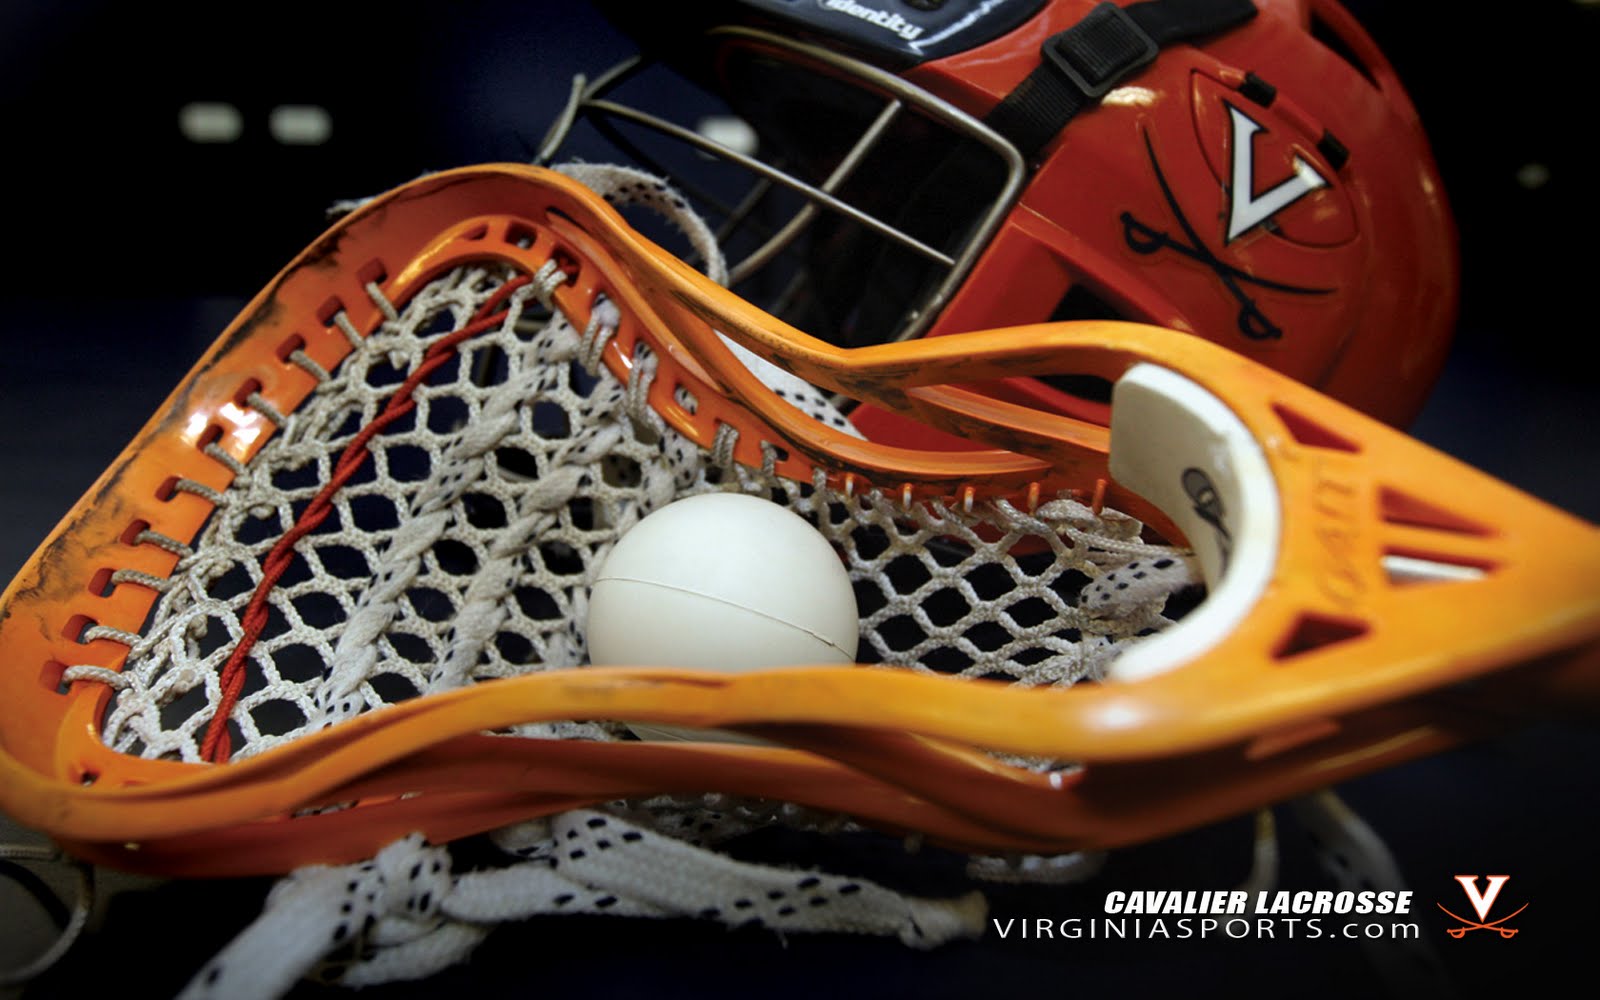 Lacrosse Wallpaper And Pictures